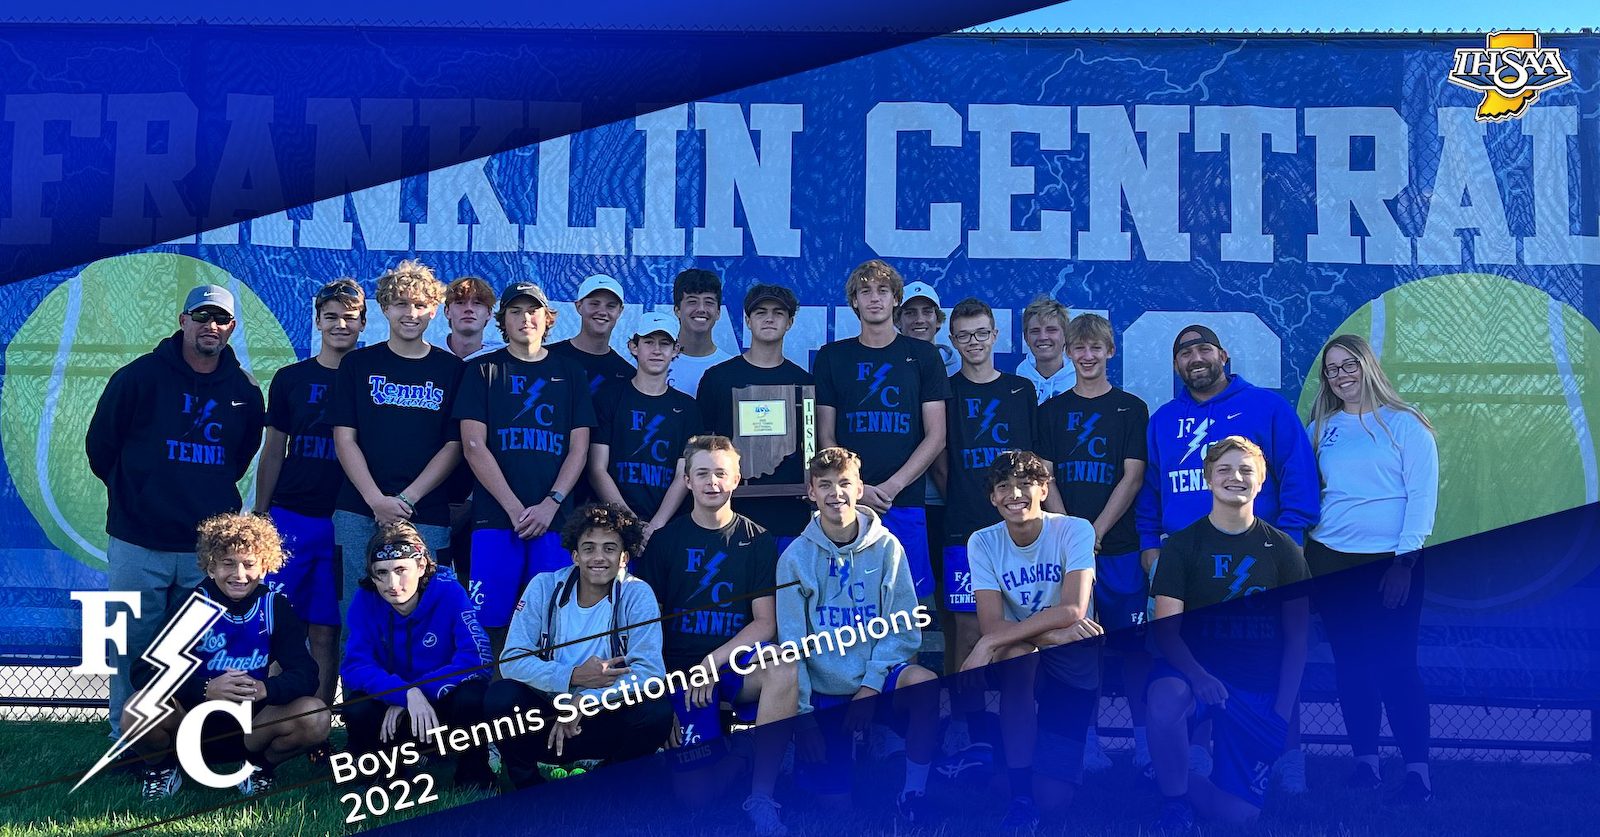 Boys Tennis - 2022 Sectional CHAMPIONS cover photo